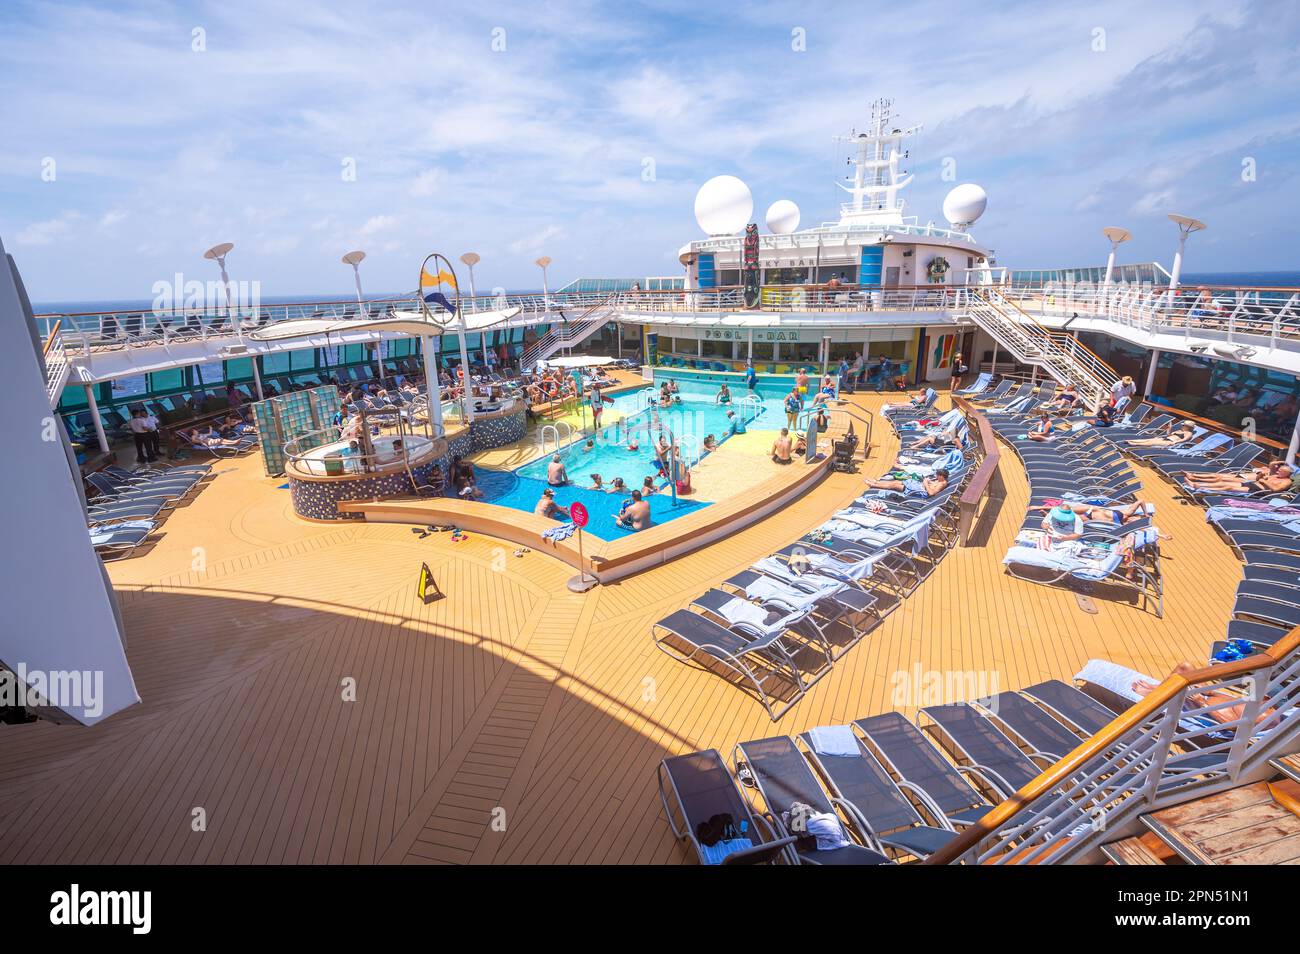 Cozumel, Mexico - April 5, 2023: View of the pool deck on the Radiance of the Seas cruise ship near Mexico. Stock Photo